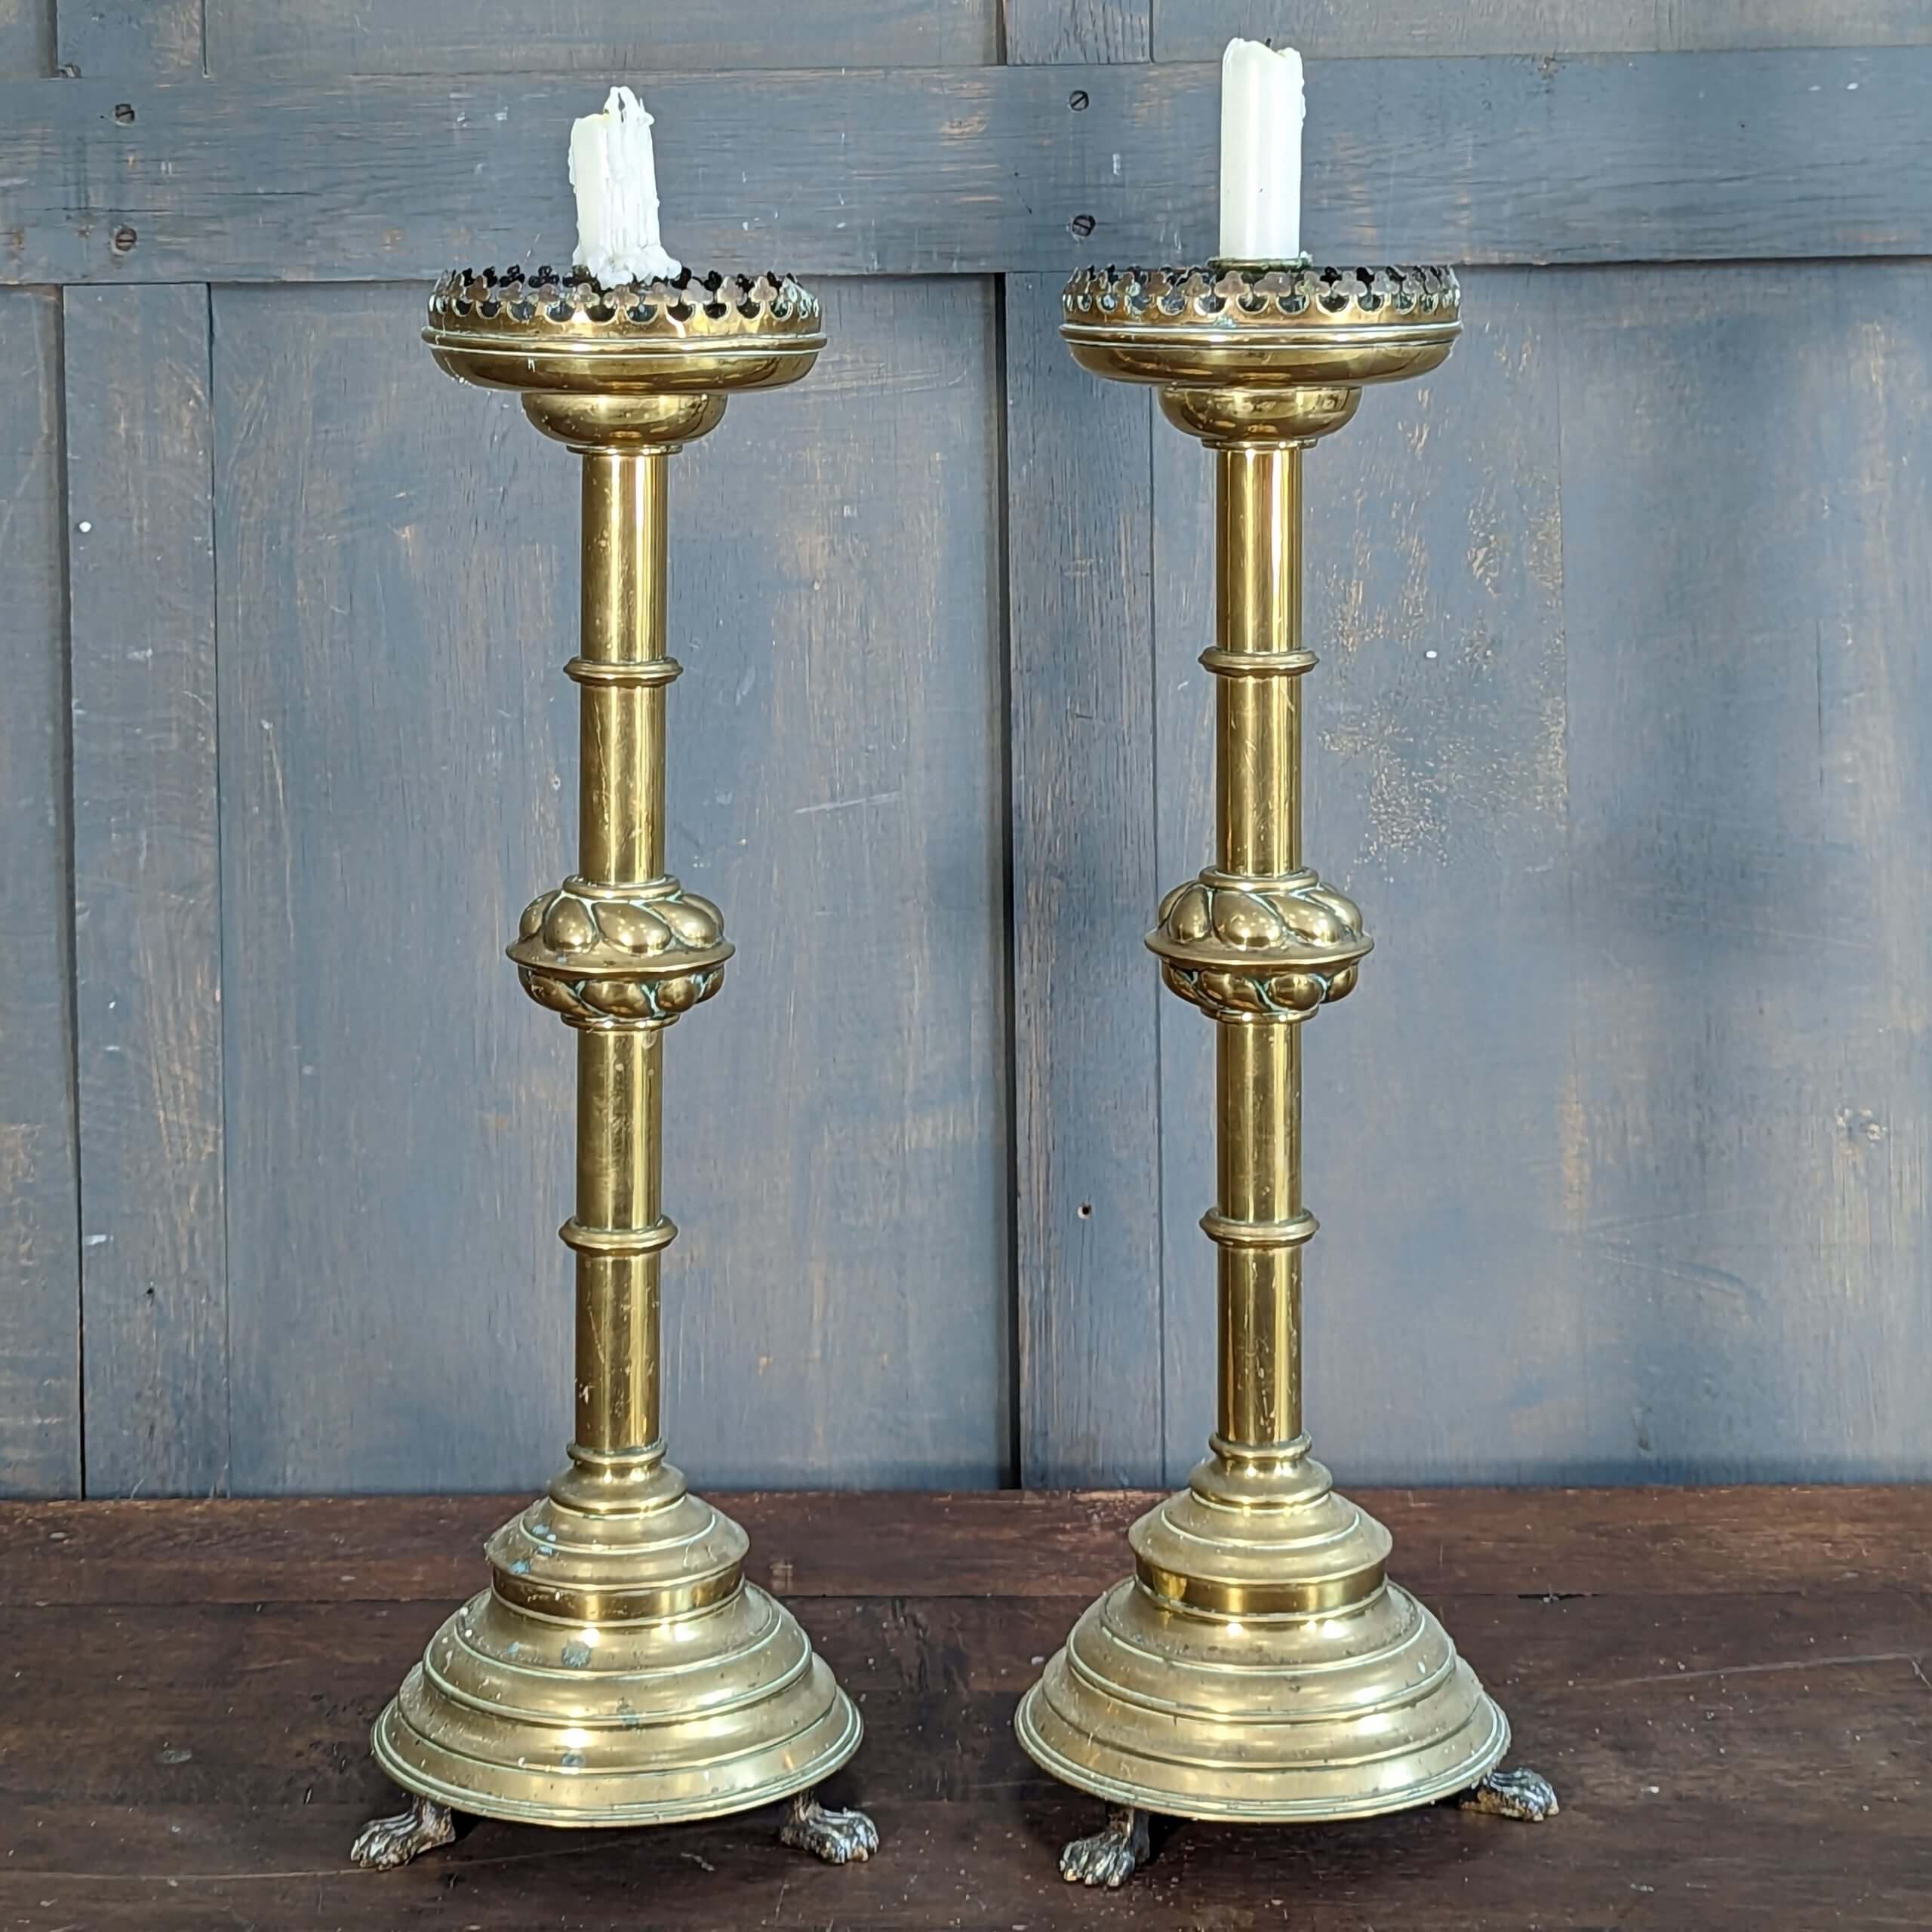 Large High Quality Antique Gothic Brass Church Altar Candlesticks with Claw  Feet (SOLD) - Antique Church Furnishings